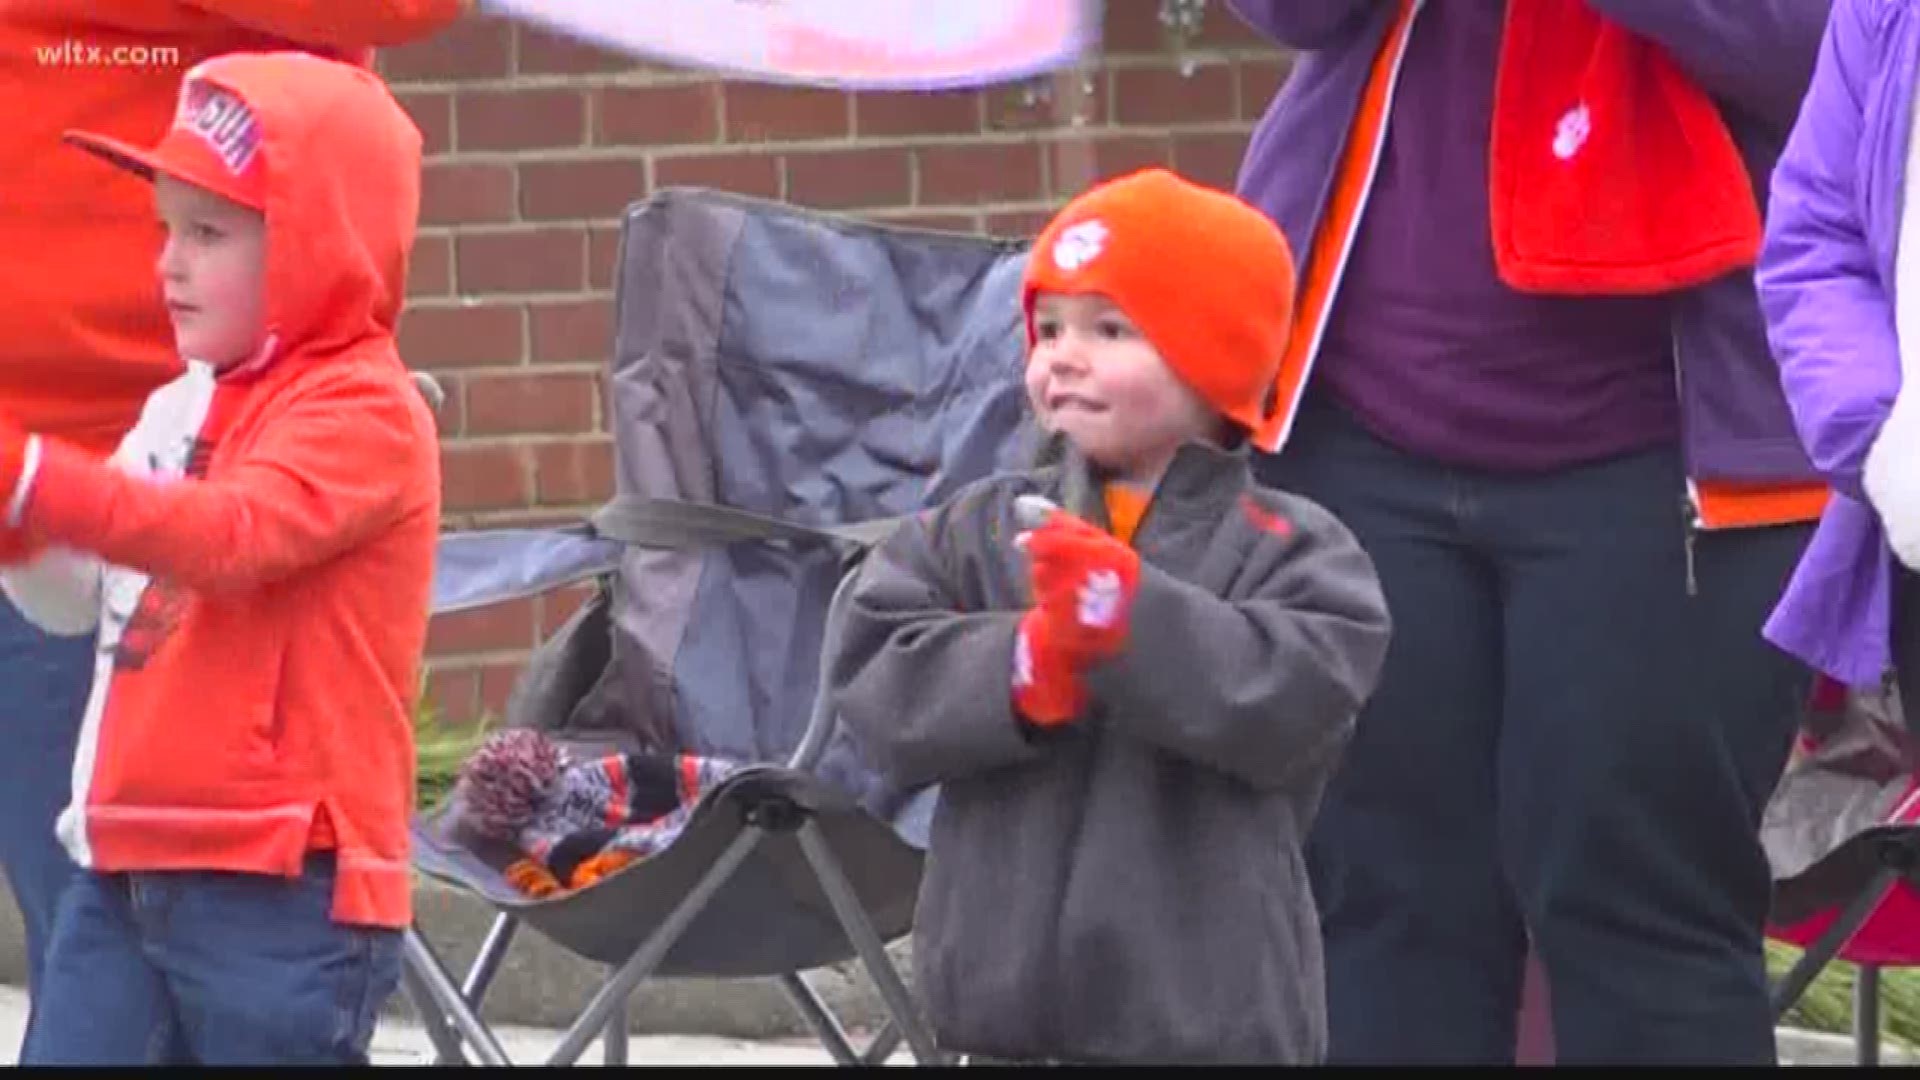 Clemson fans came out on a cold Saturday morning to celebrate with the team.